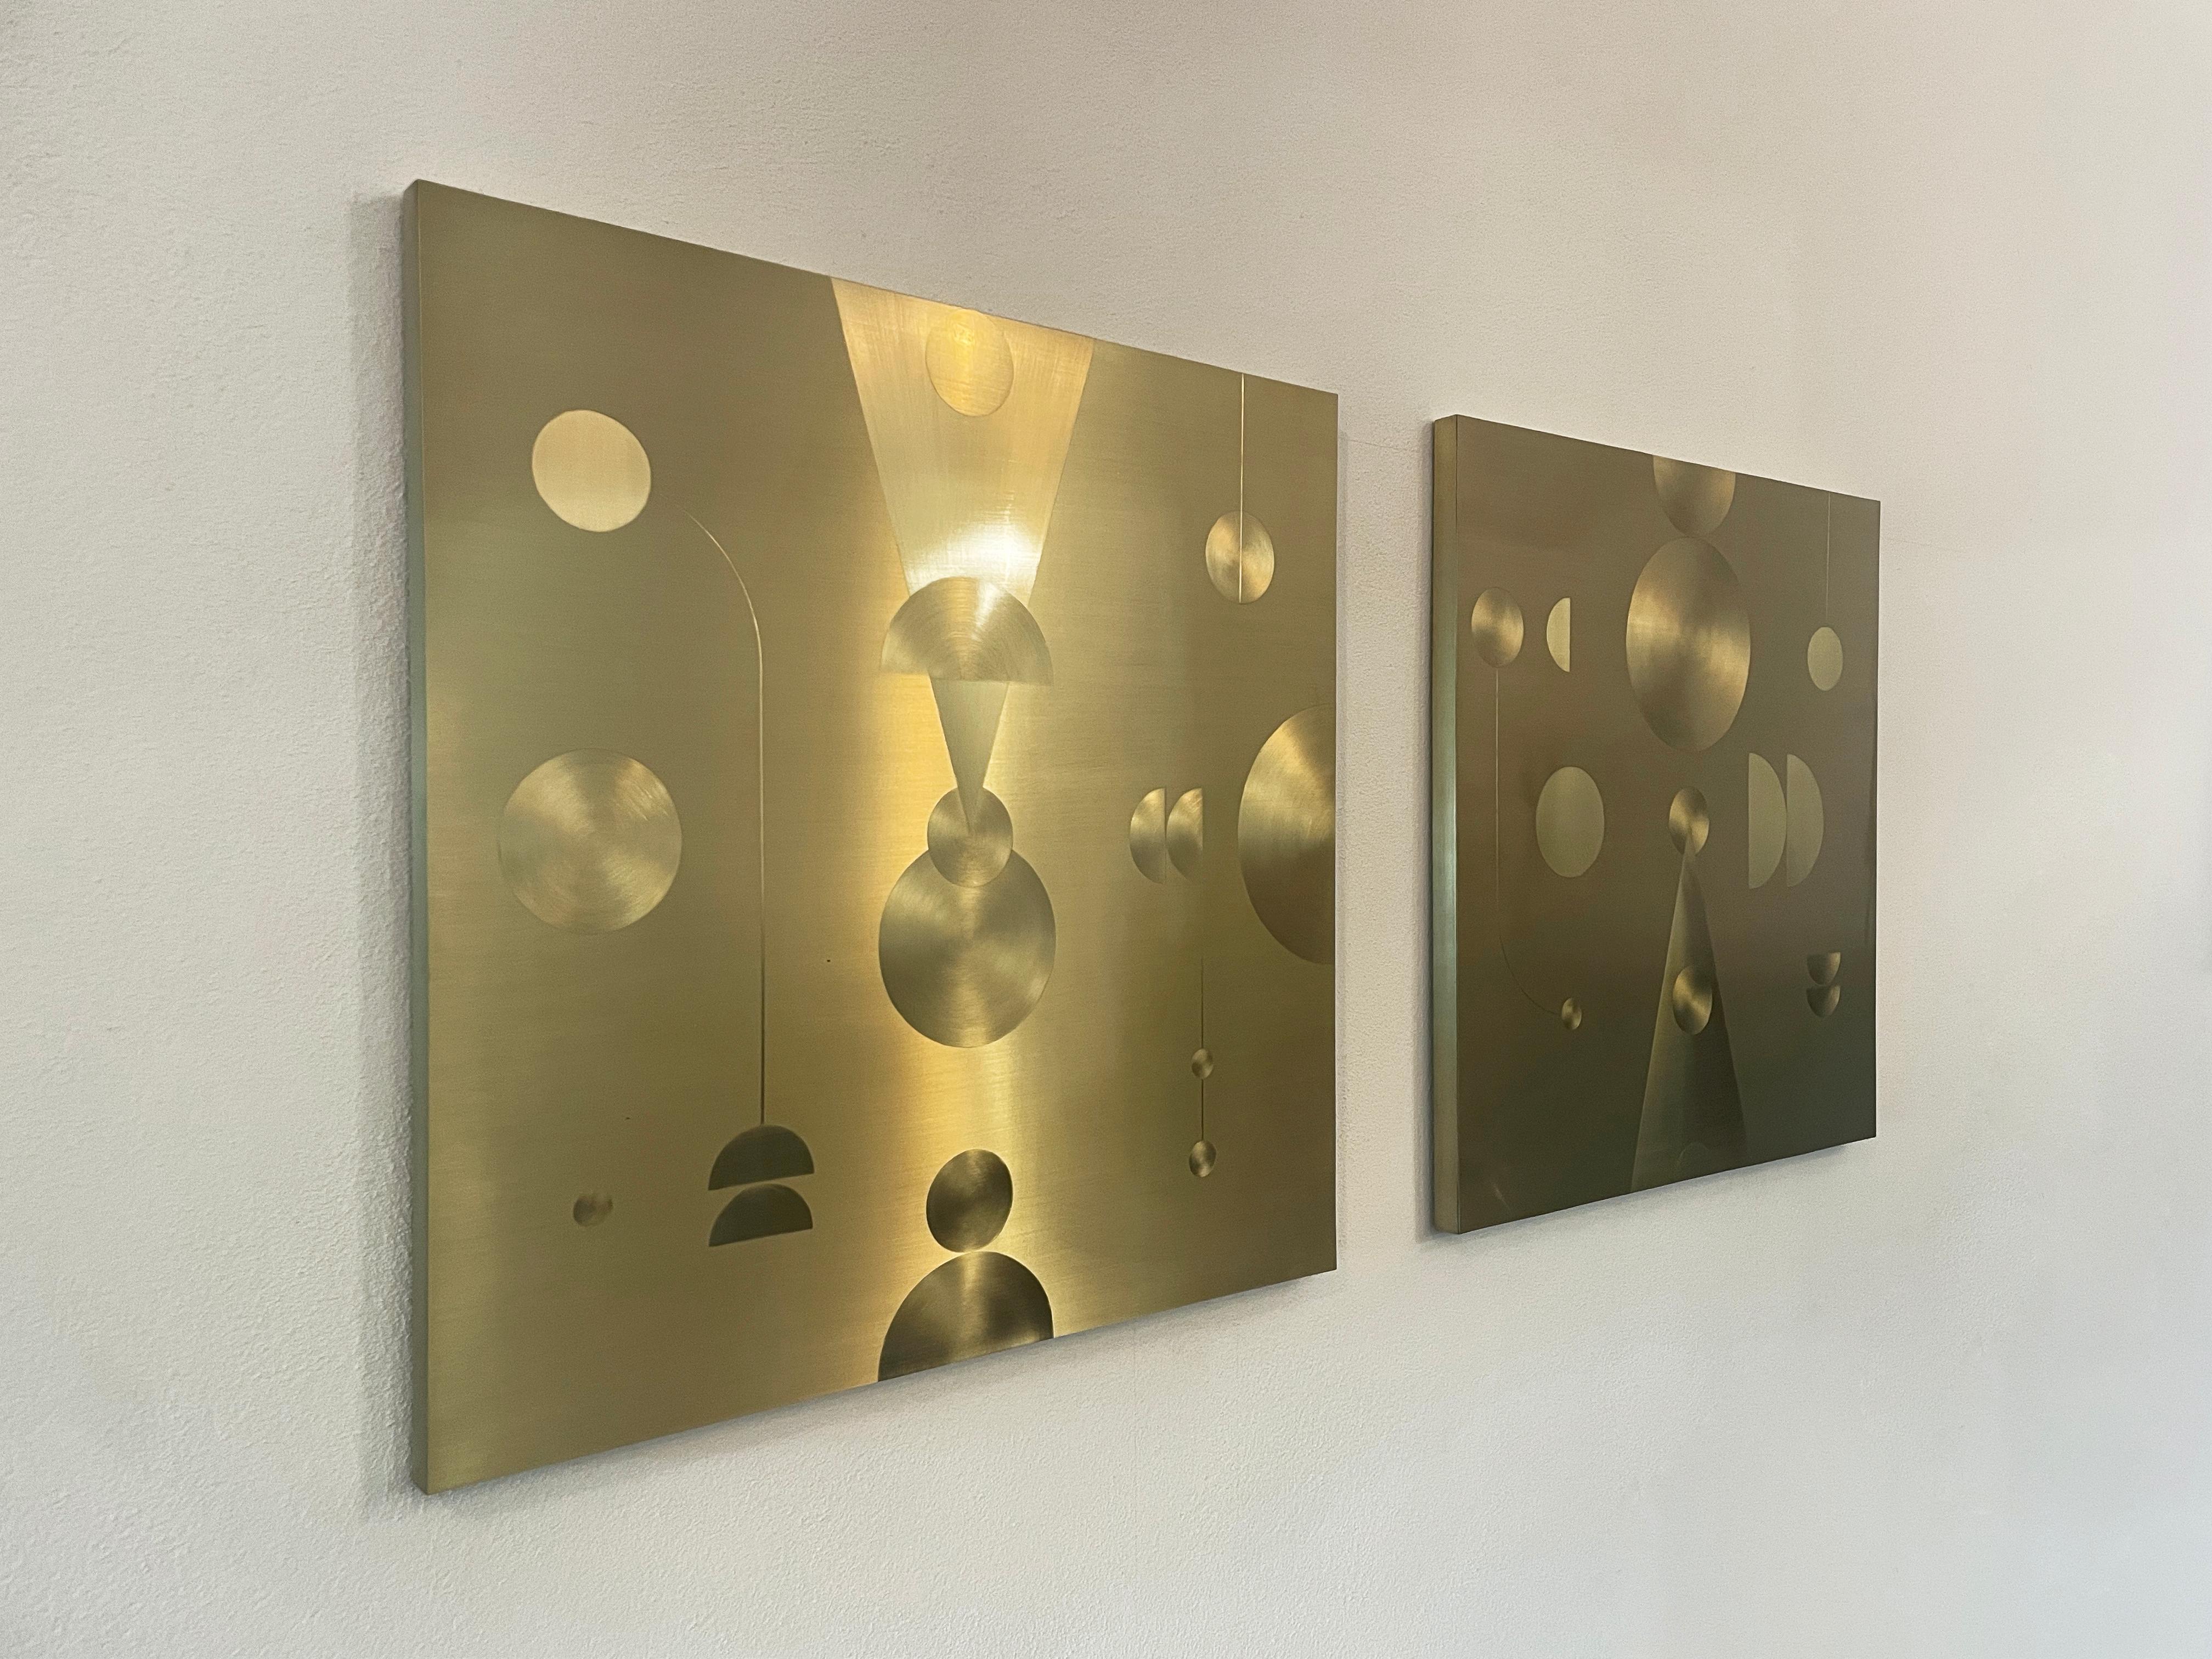 Contemporary Art, Metal
Brushed brass on wood 
60x60cm
Signed and dated on the back



